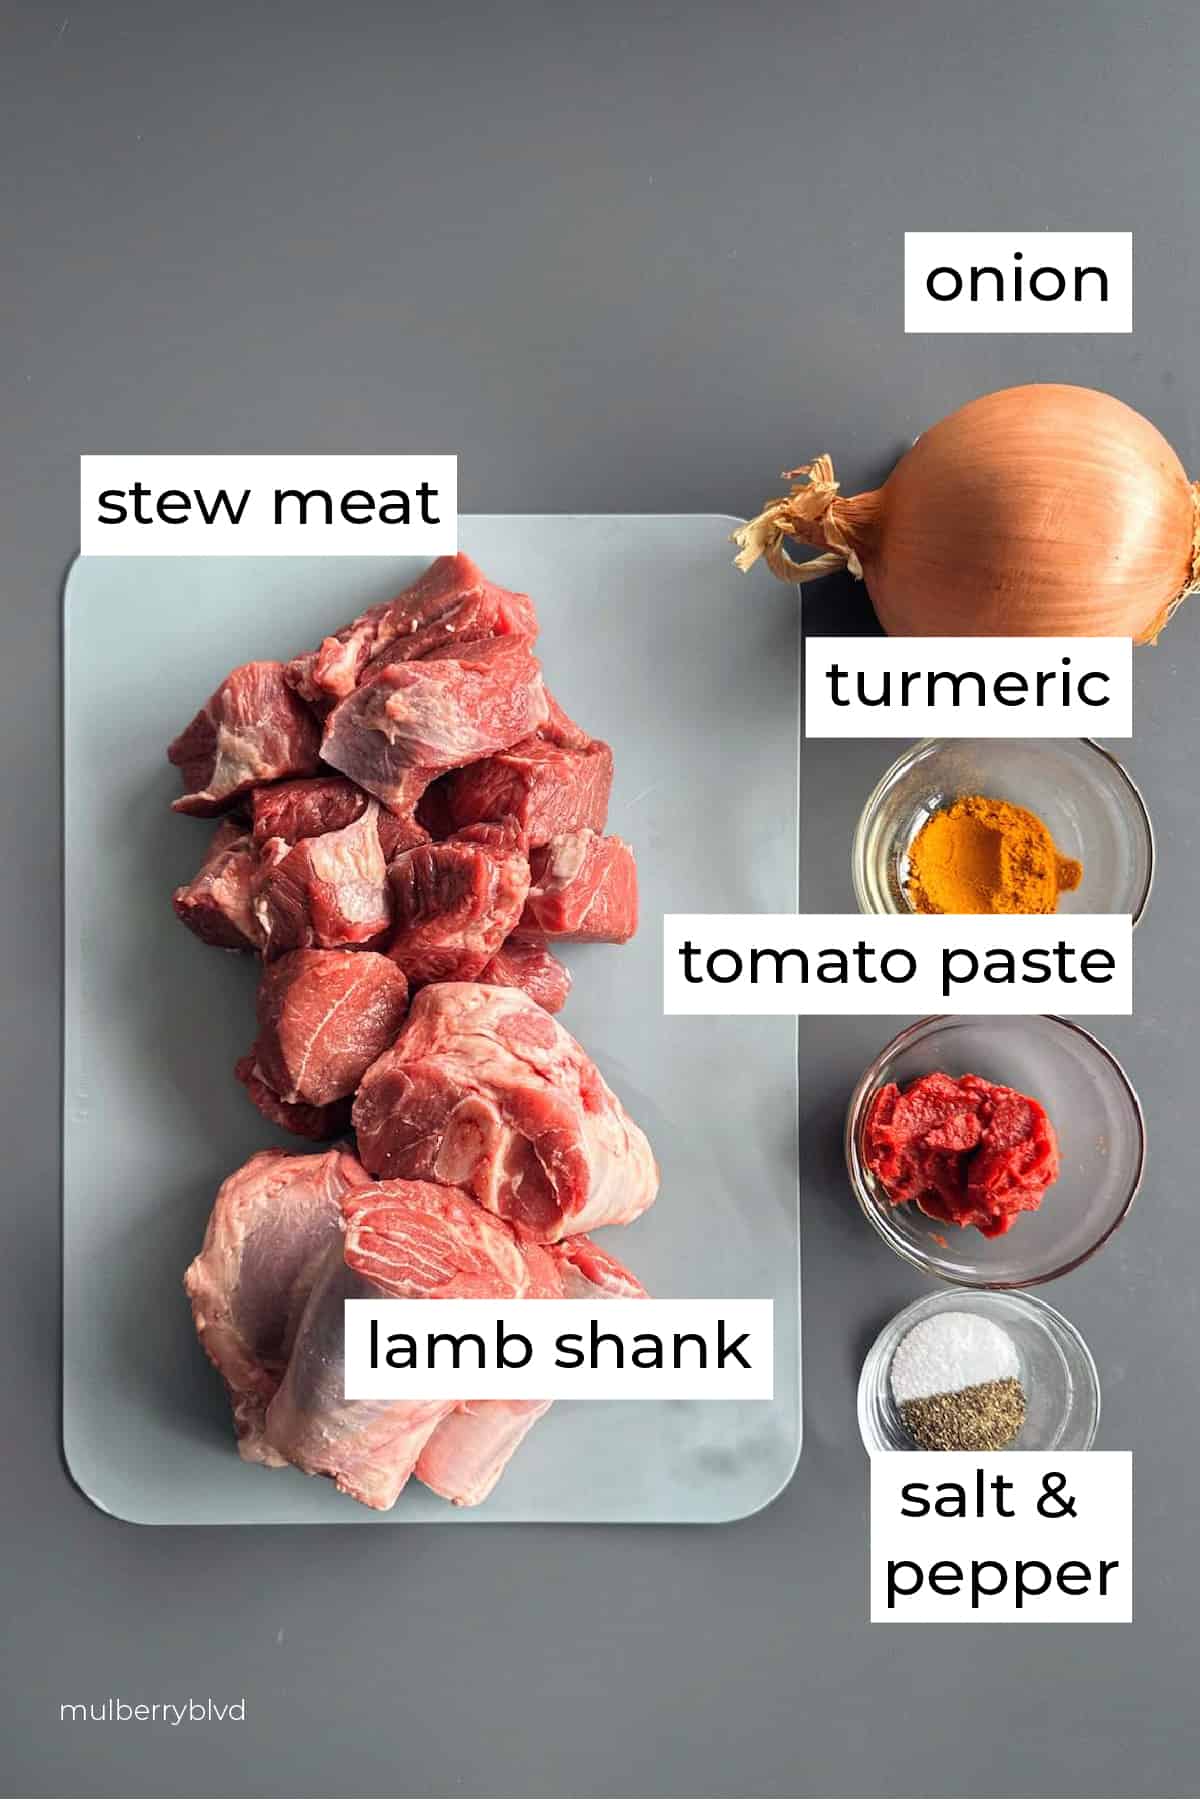 Picture of ingredients. Stew meat, lamb shank, onion, turmeric, tomato paste, salt and pepper